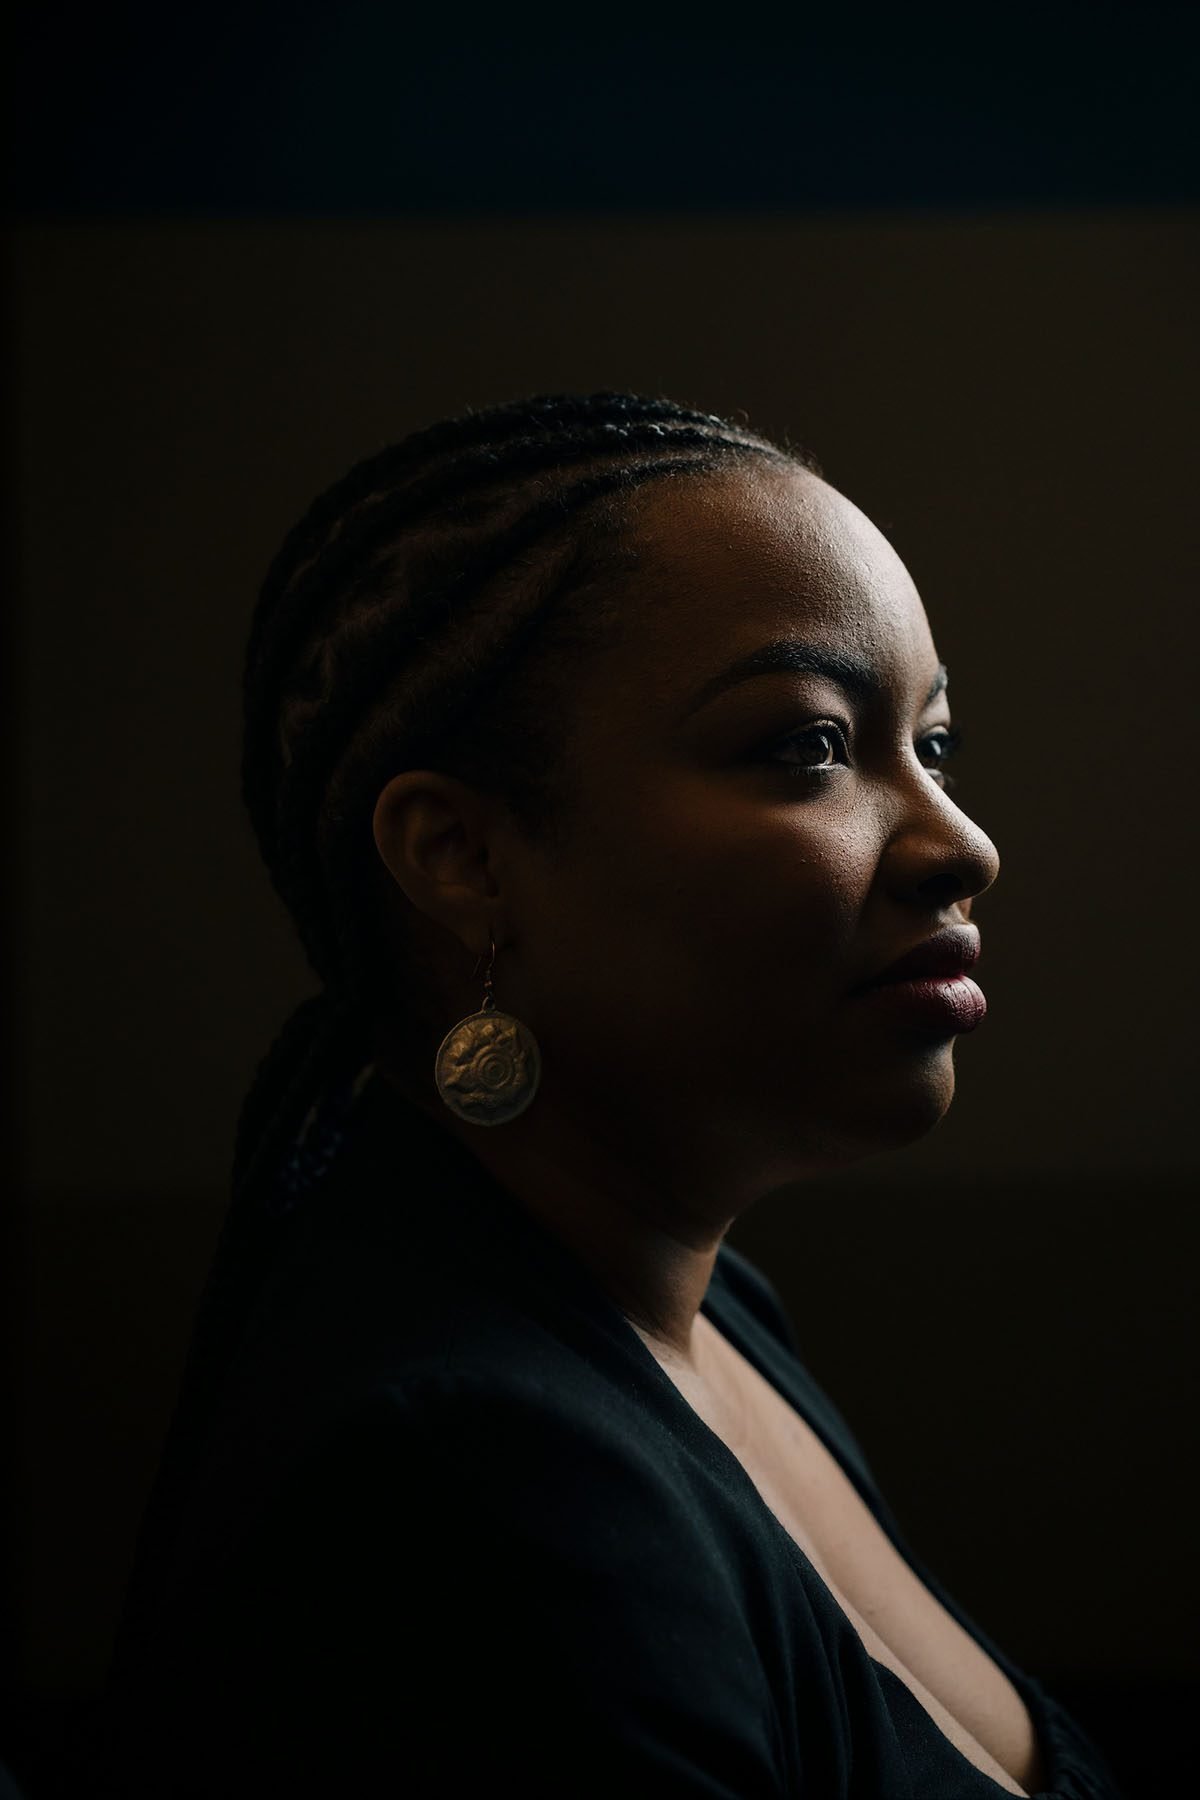 Ayesha Roscoe poses for a portrait at the NPR headquarters in Washington, D.C.